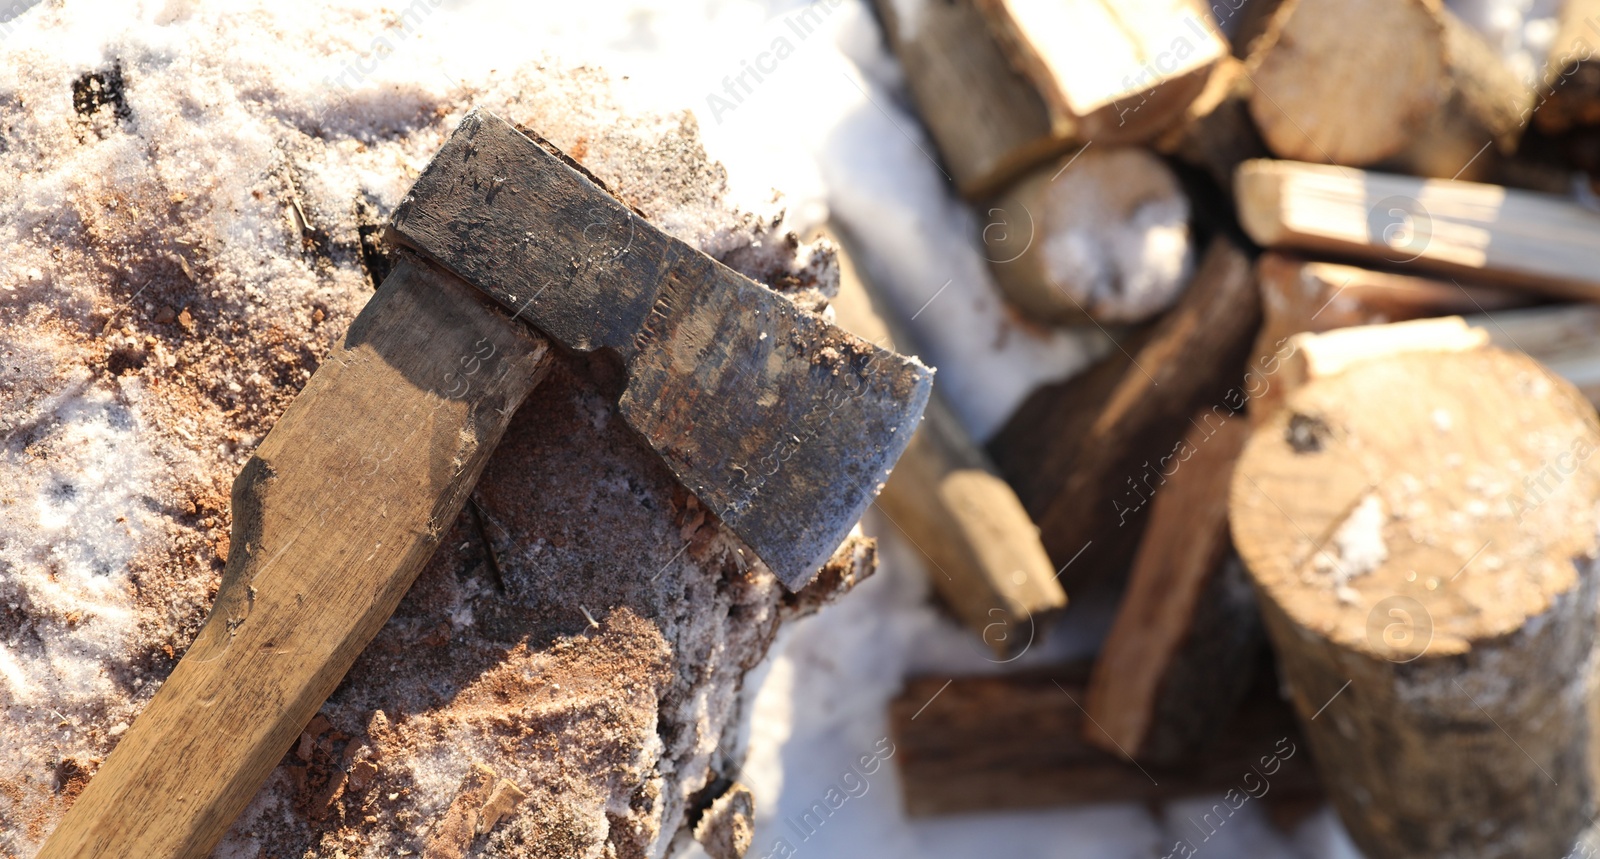 Photo of Metal axe on wooden log and pile of wood outdoors on sunny winter day, top view. Space for text